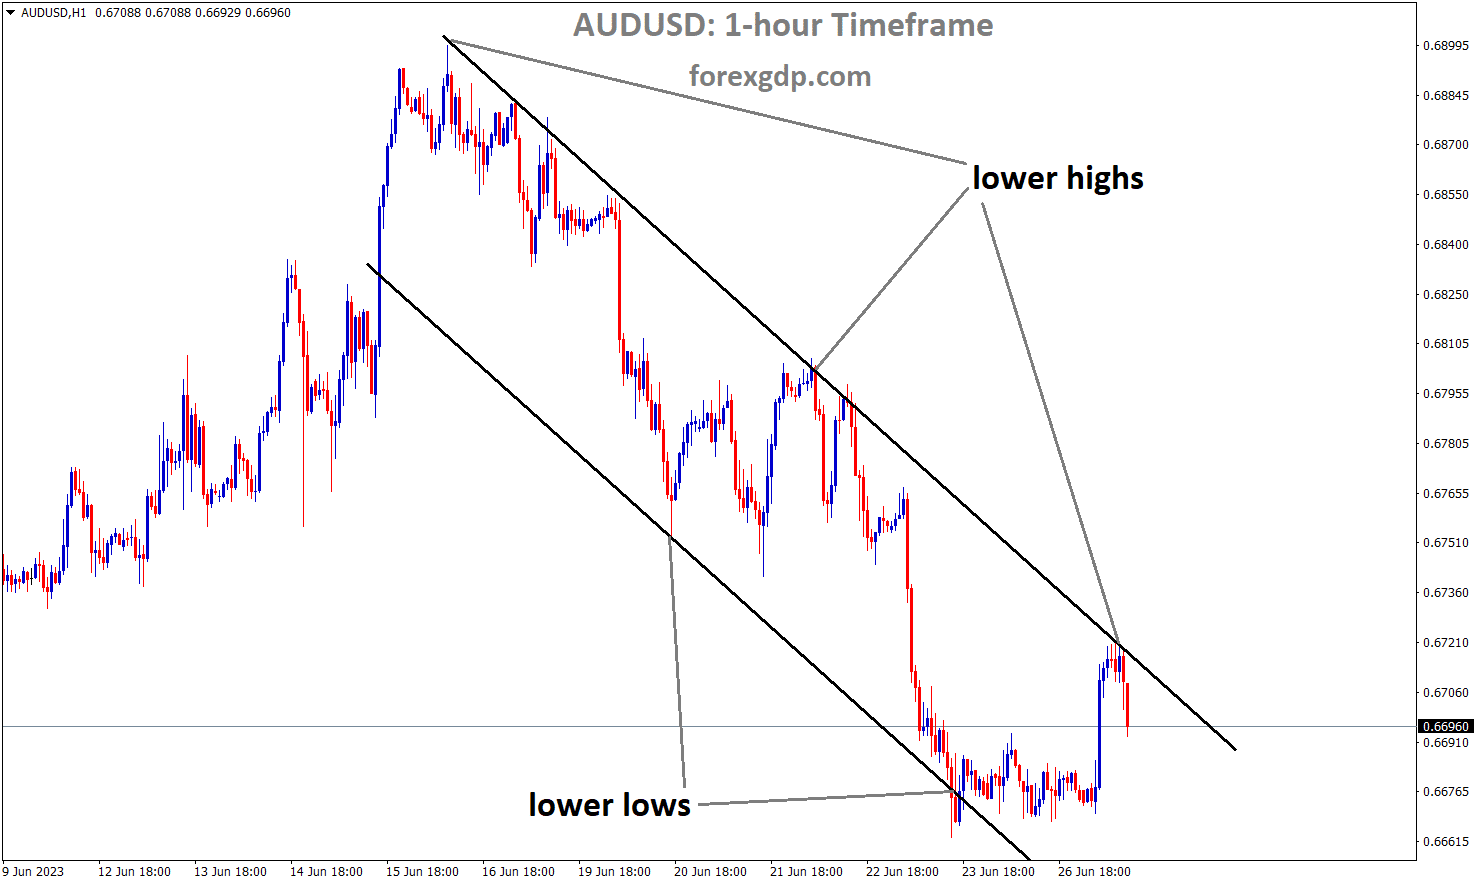 AUDUSD is moving in the Descending channel and the market has fallen from the lower high area of the channel